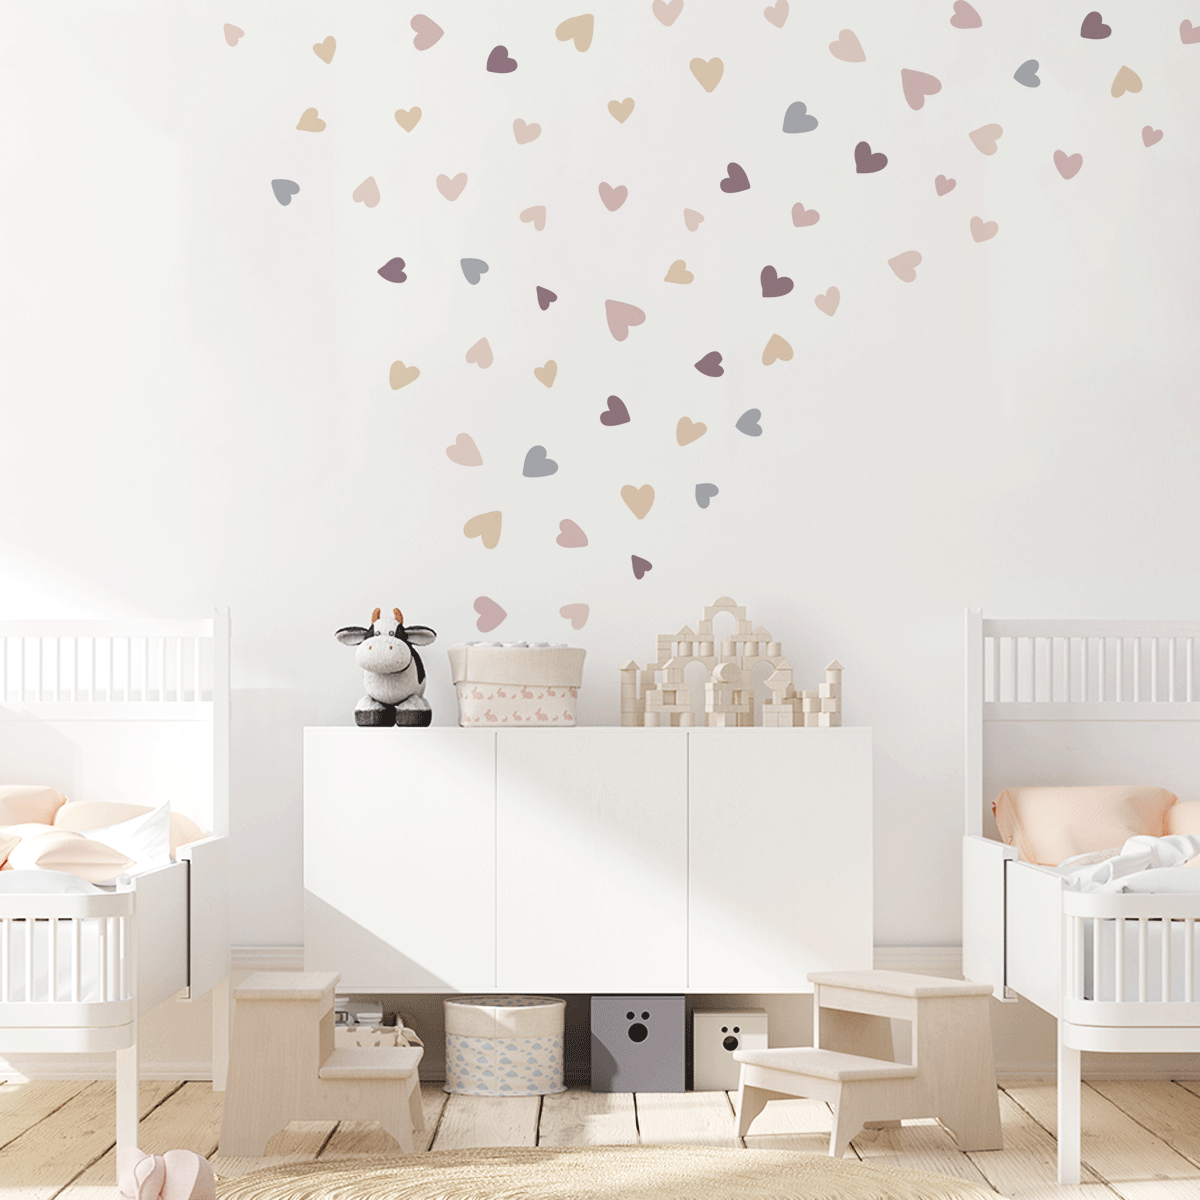 Wall sticker colourful hearts, wall decal, nursery decoration, wall decoration, girls wall sticker, nursery ideas, kids bedroom ideas, nursery decoration ideas, pastel hearts wall sticker, pastel hearts wall decal